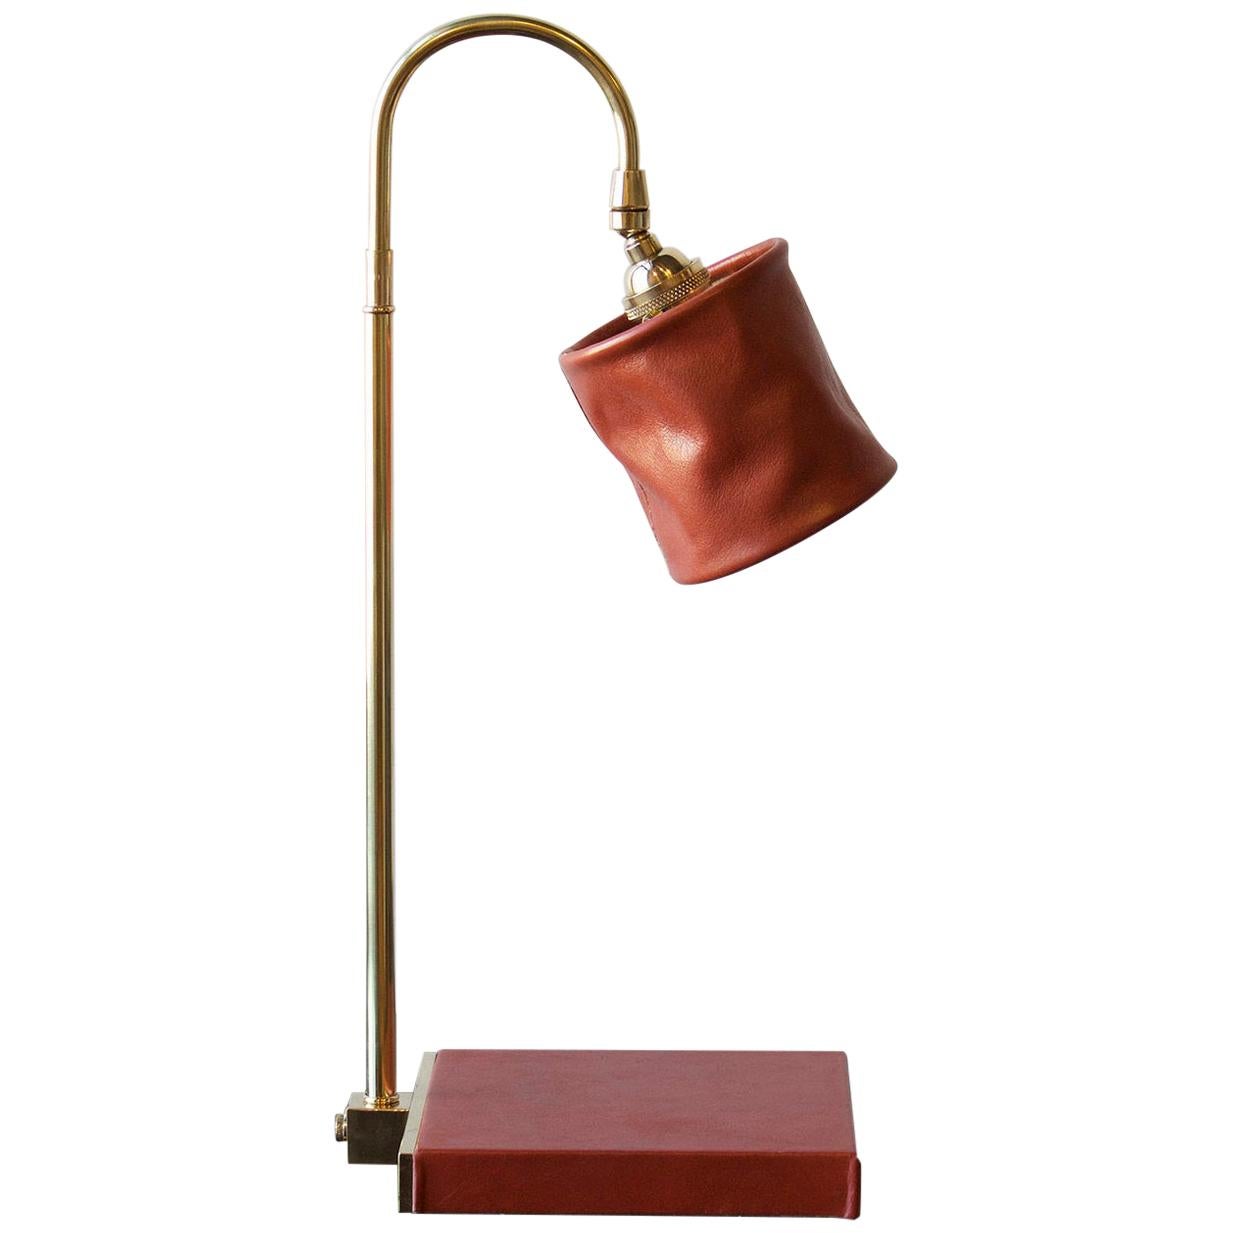 Series01 Desk Lamp, Hand-Dyed Gochujang Red Leather, Polished Unlacquered Brass